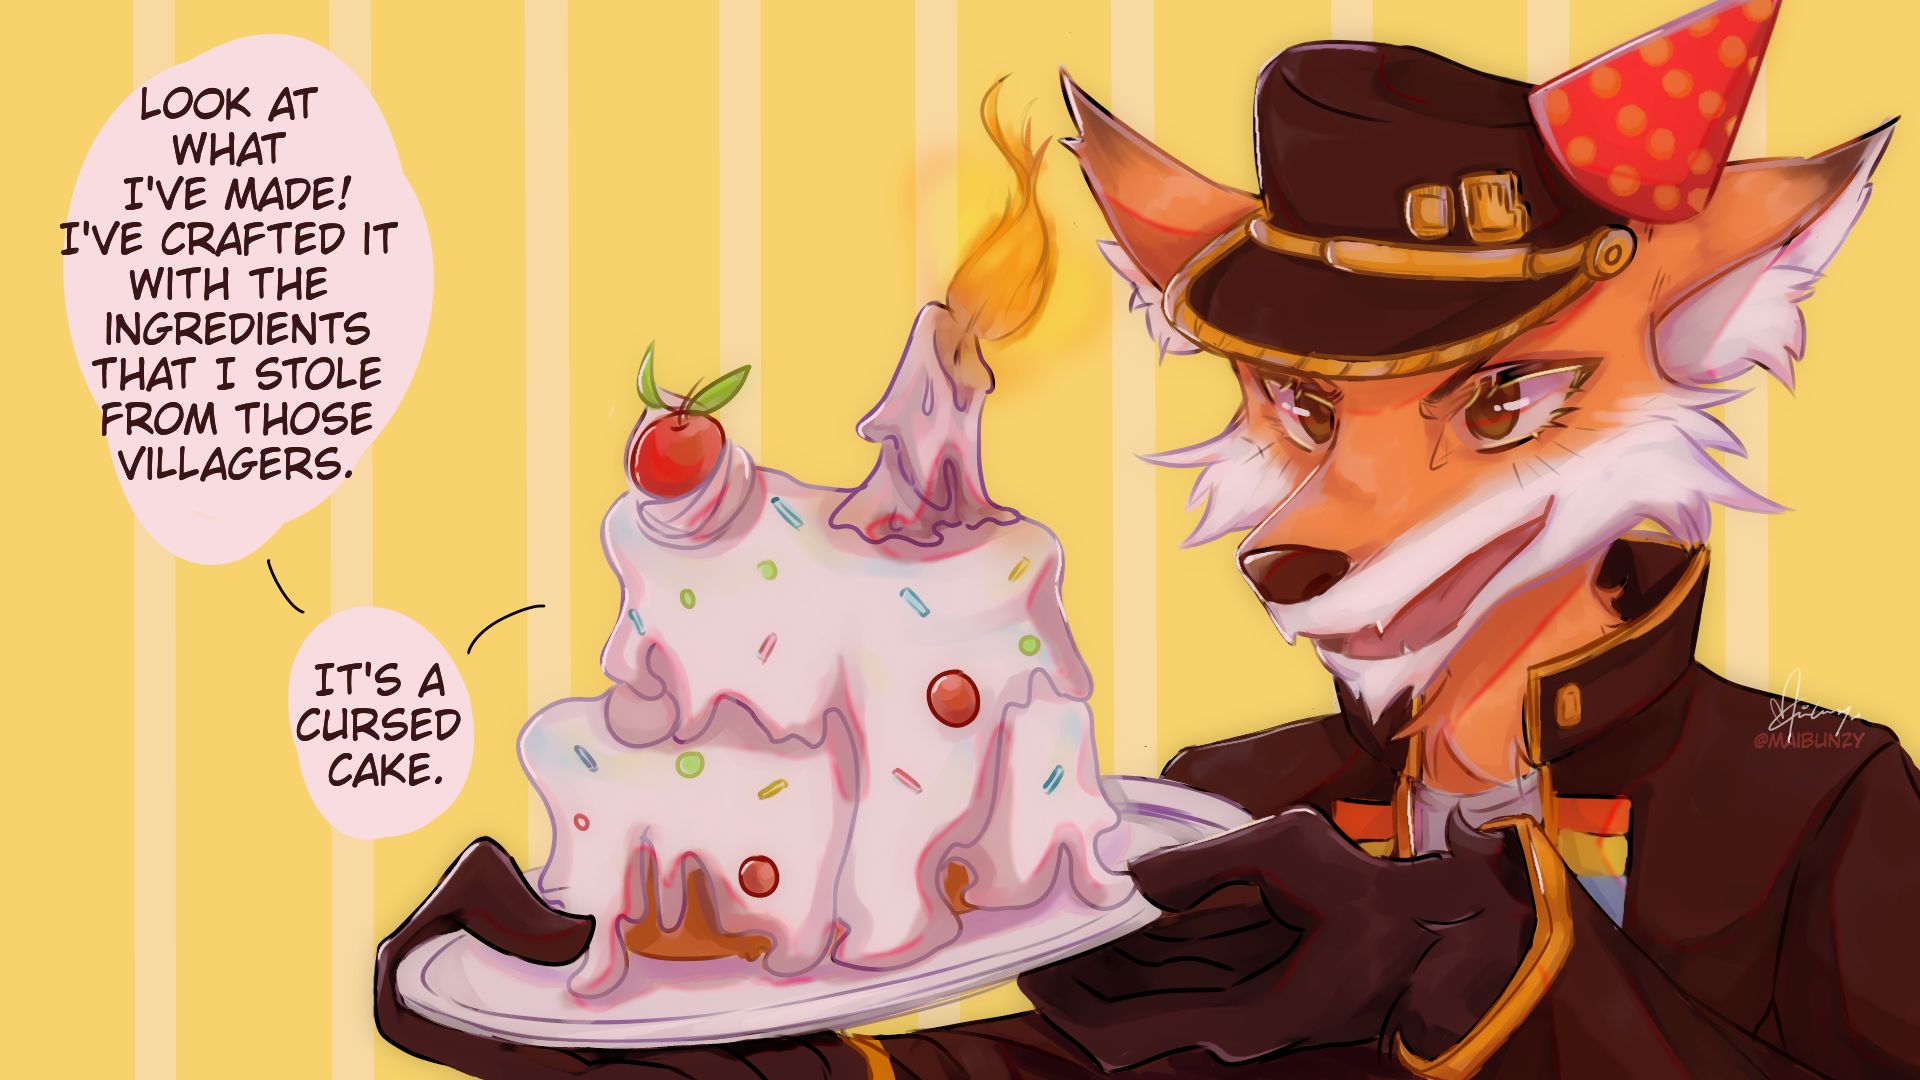 old fanart i did for fundy's previous birthday